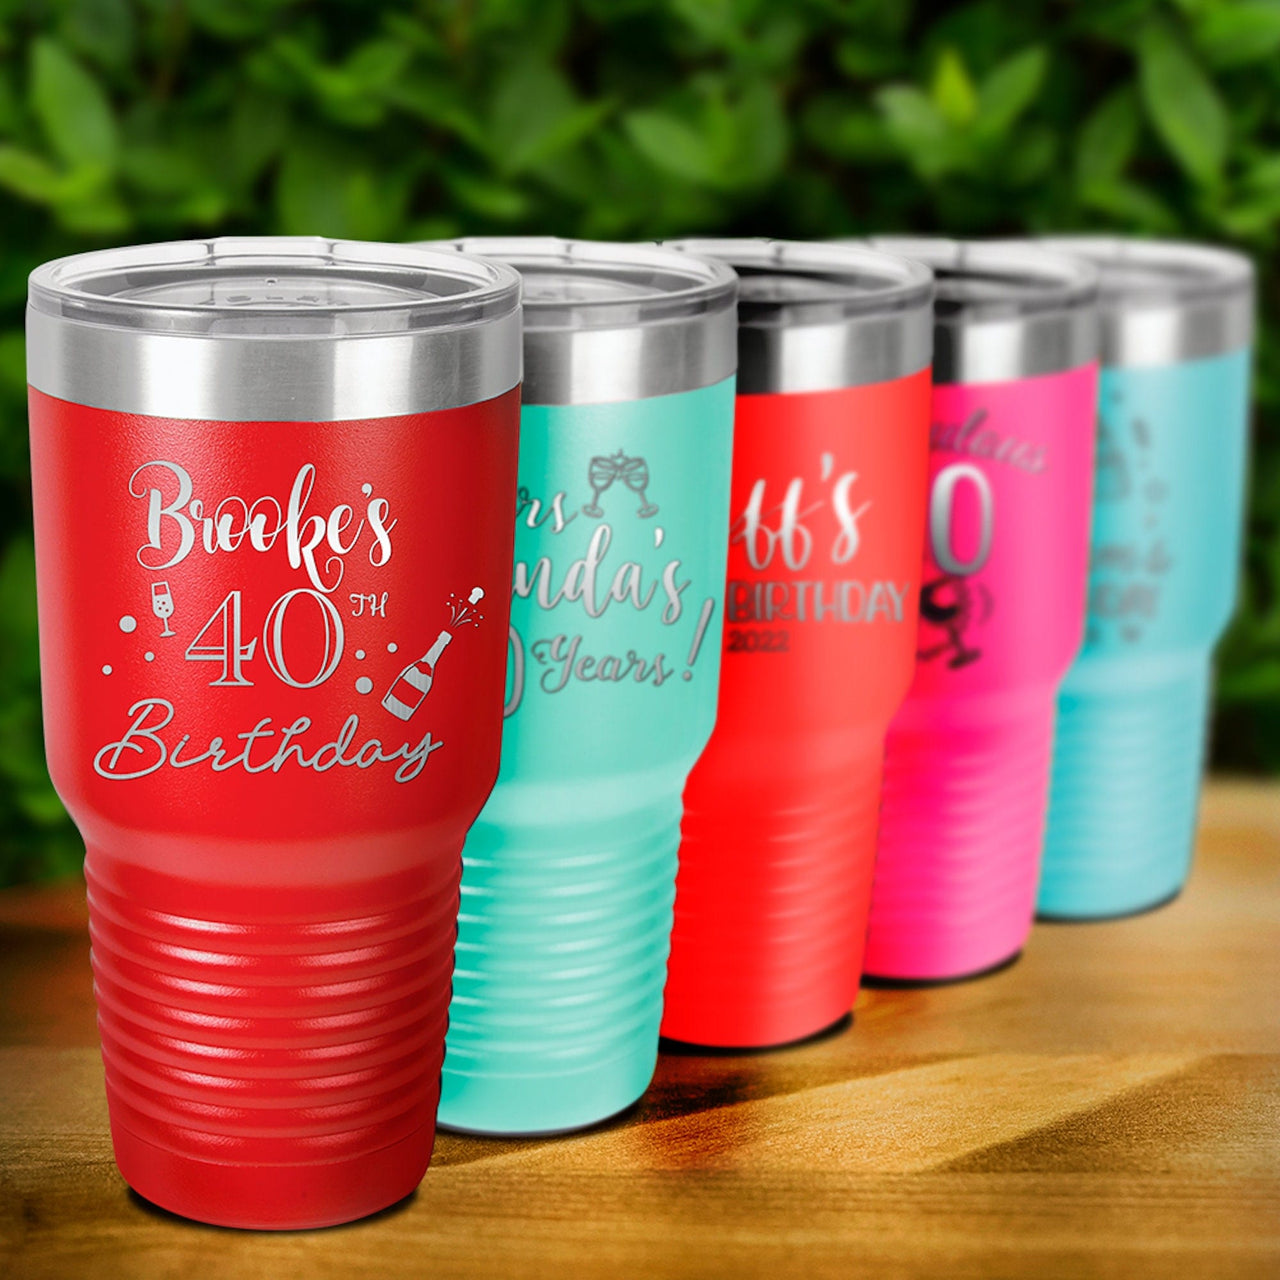 Personalized Tumbler Birthday Gifts, 40th Birthday 50th Birthday Gift, Custom Tumbler Birthday Gift, Birthday Gift For Him,Insulated Tumbler